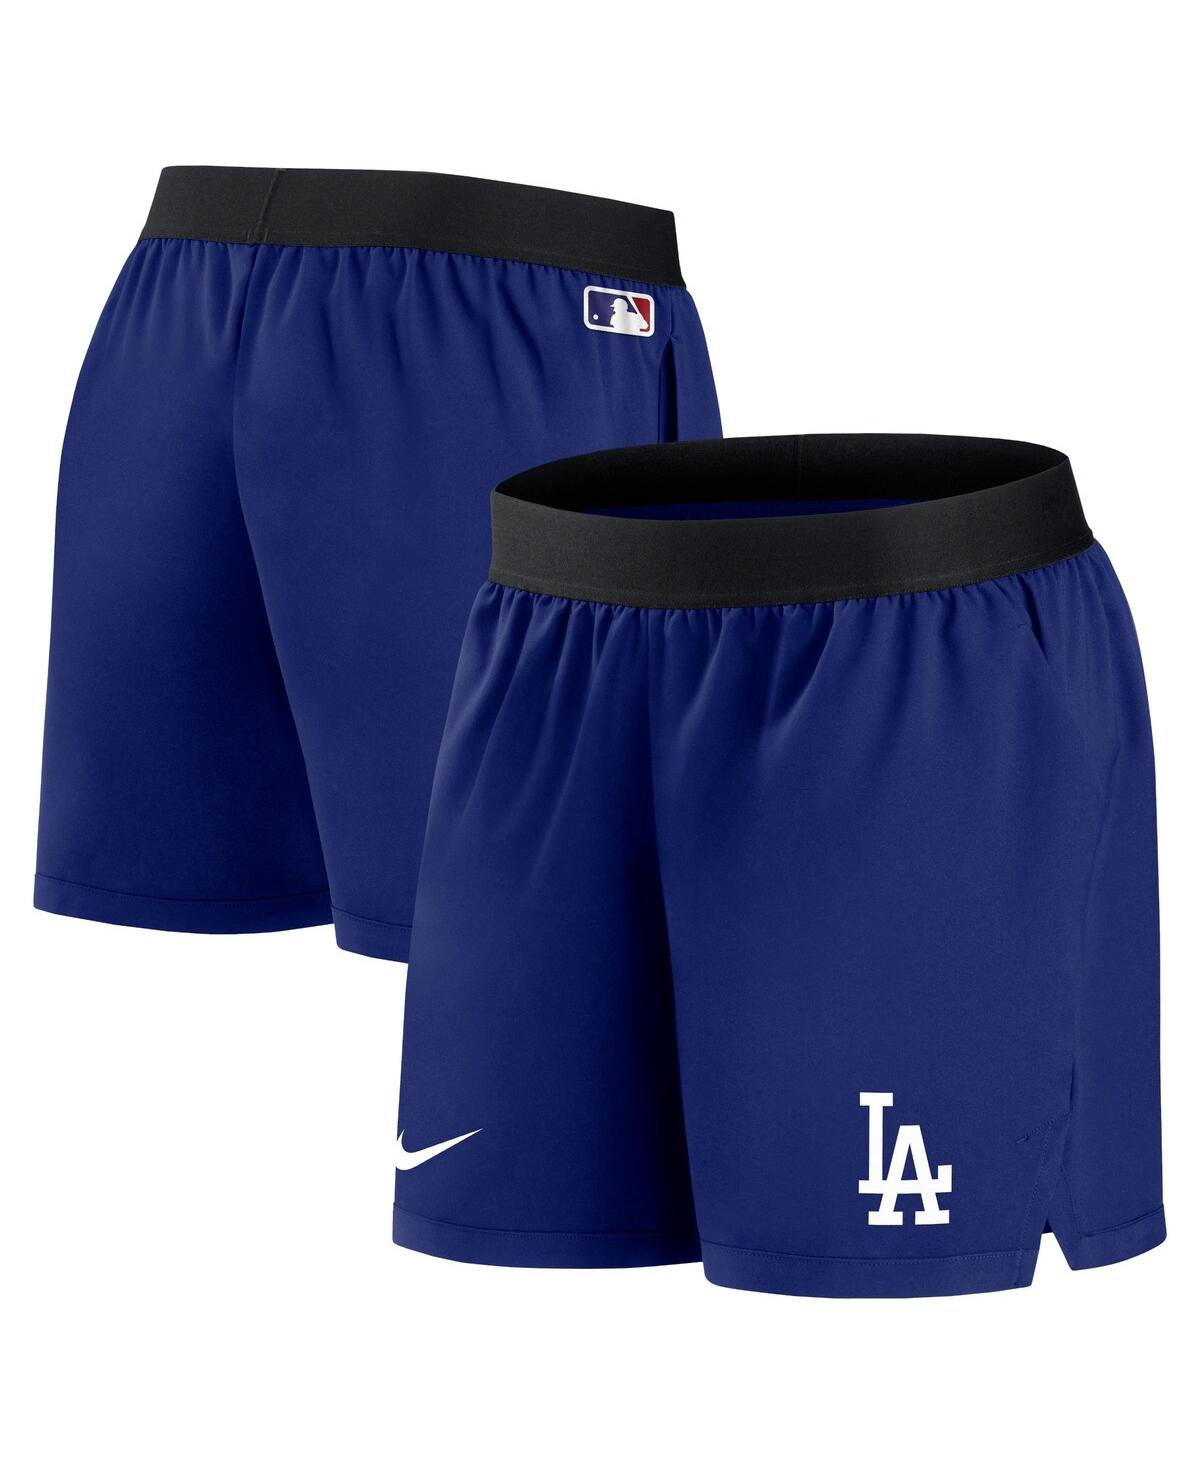 Women's Nike Royal Los Angeles Dodgers Authentic Collection Team Performance Shorts - Royal